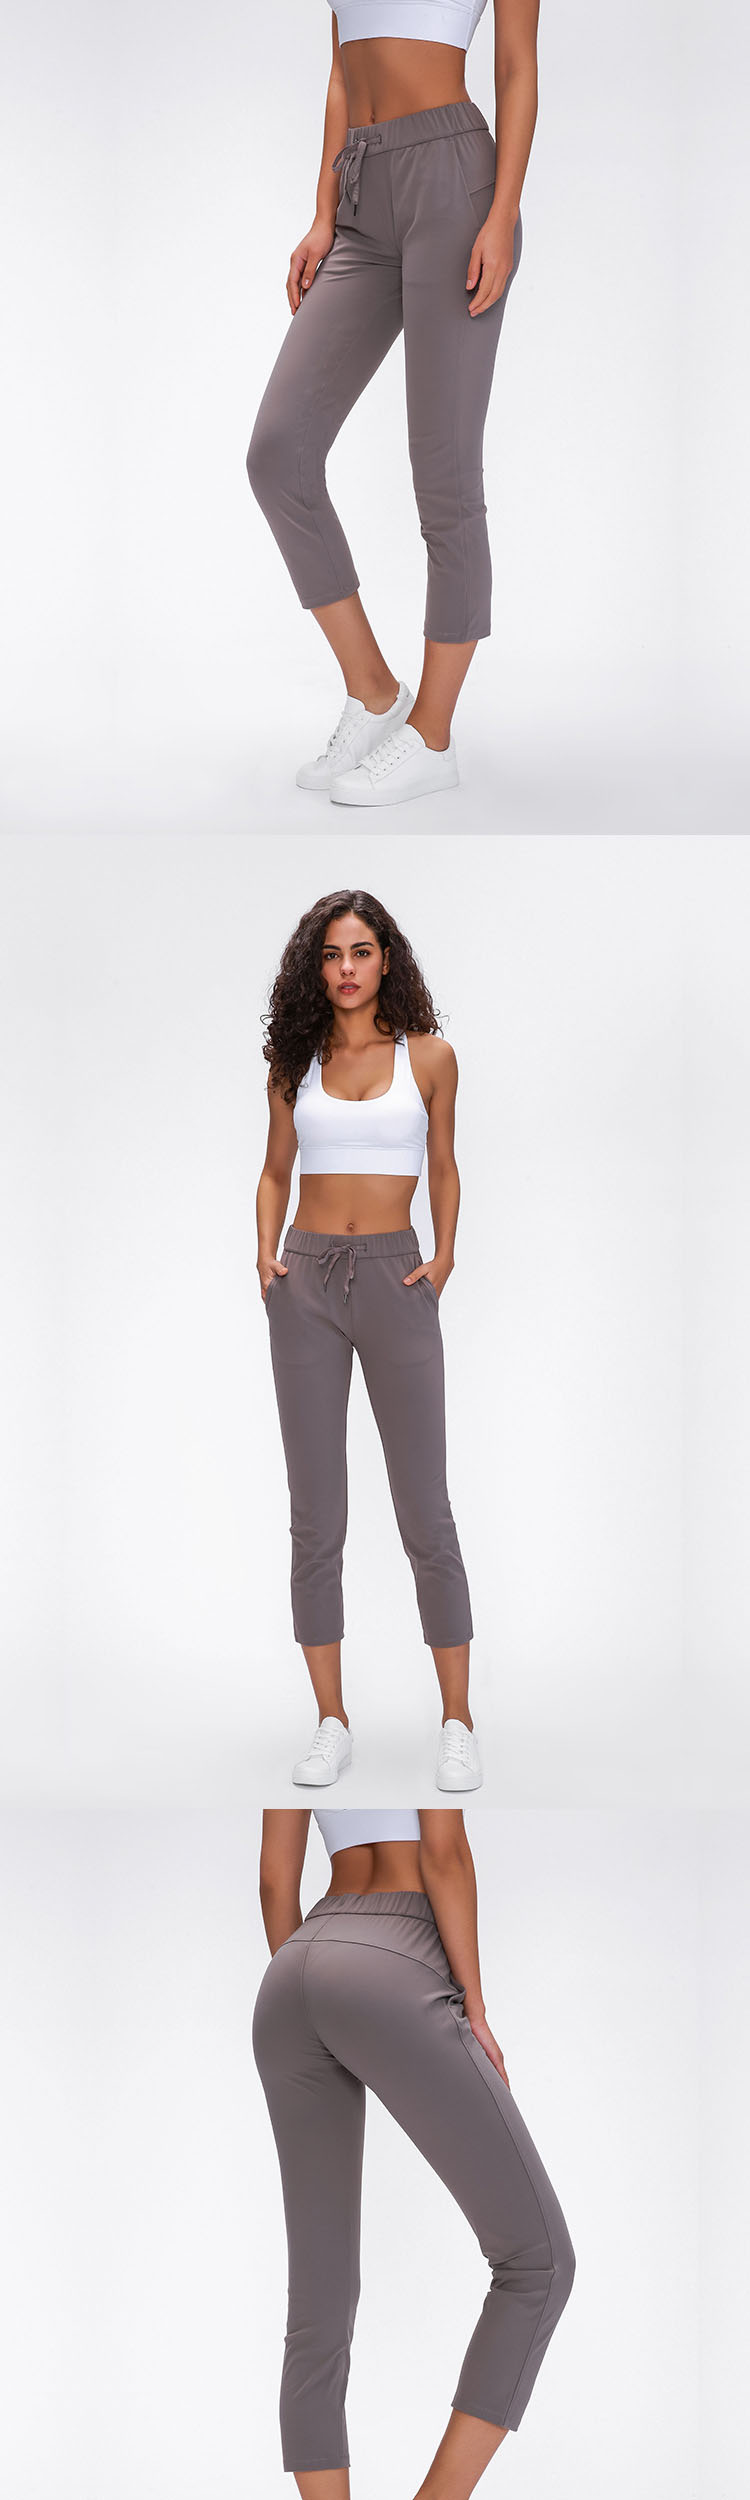 Knitted yoga pants have good tolerance, increase the texture and breathability of yoga pants.